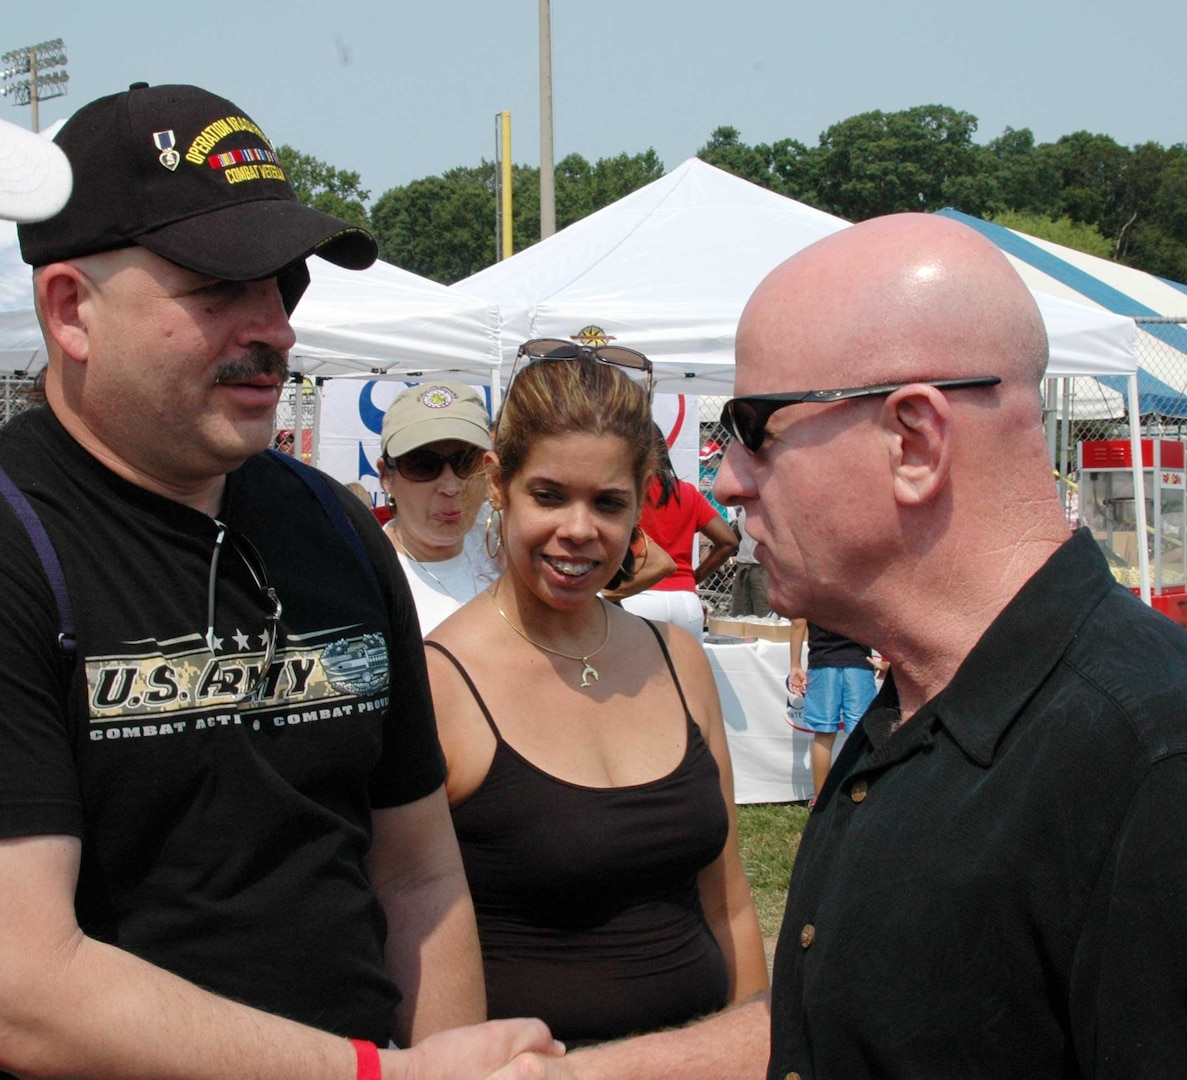 LTG H Steven Blum, chief of the National Guard Bureau, greets Sgt. Luis Martinez (left) and Martinez's wife, Sylvia, at the National Guard Bureau Picnic held Aug. 15 in Woodbridge, Va. Martinez, whose left eye cornea and lens were destroyed on April 22 by a penetrator device explosion, was one of 27 National Guard Wounded Warriors from Walter Reed Army Medical Center who attended the event.